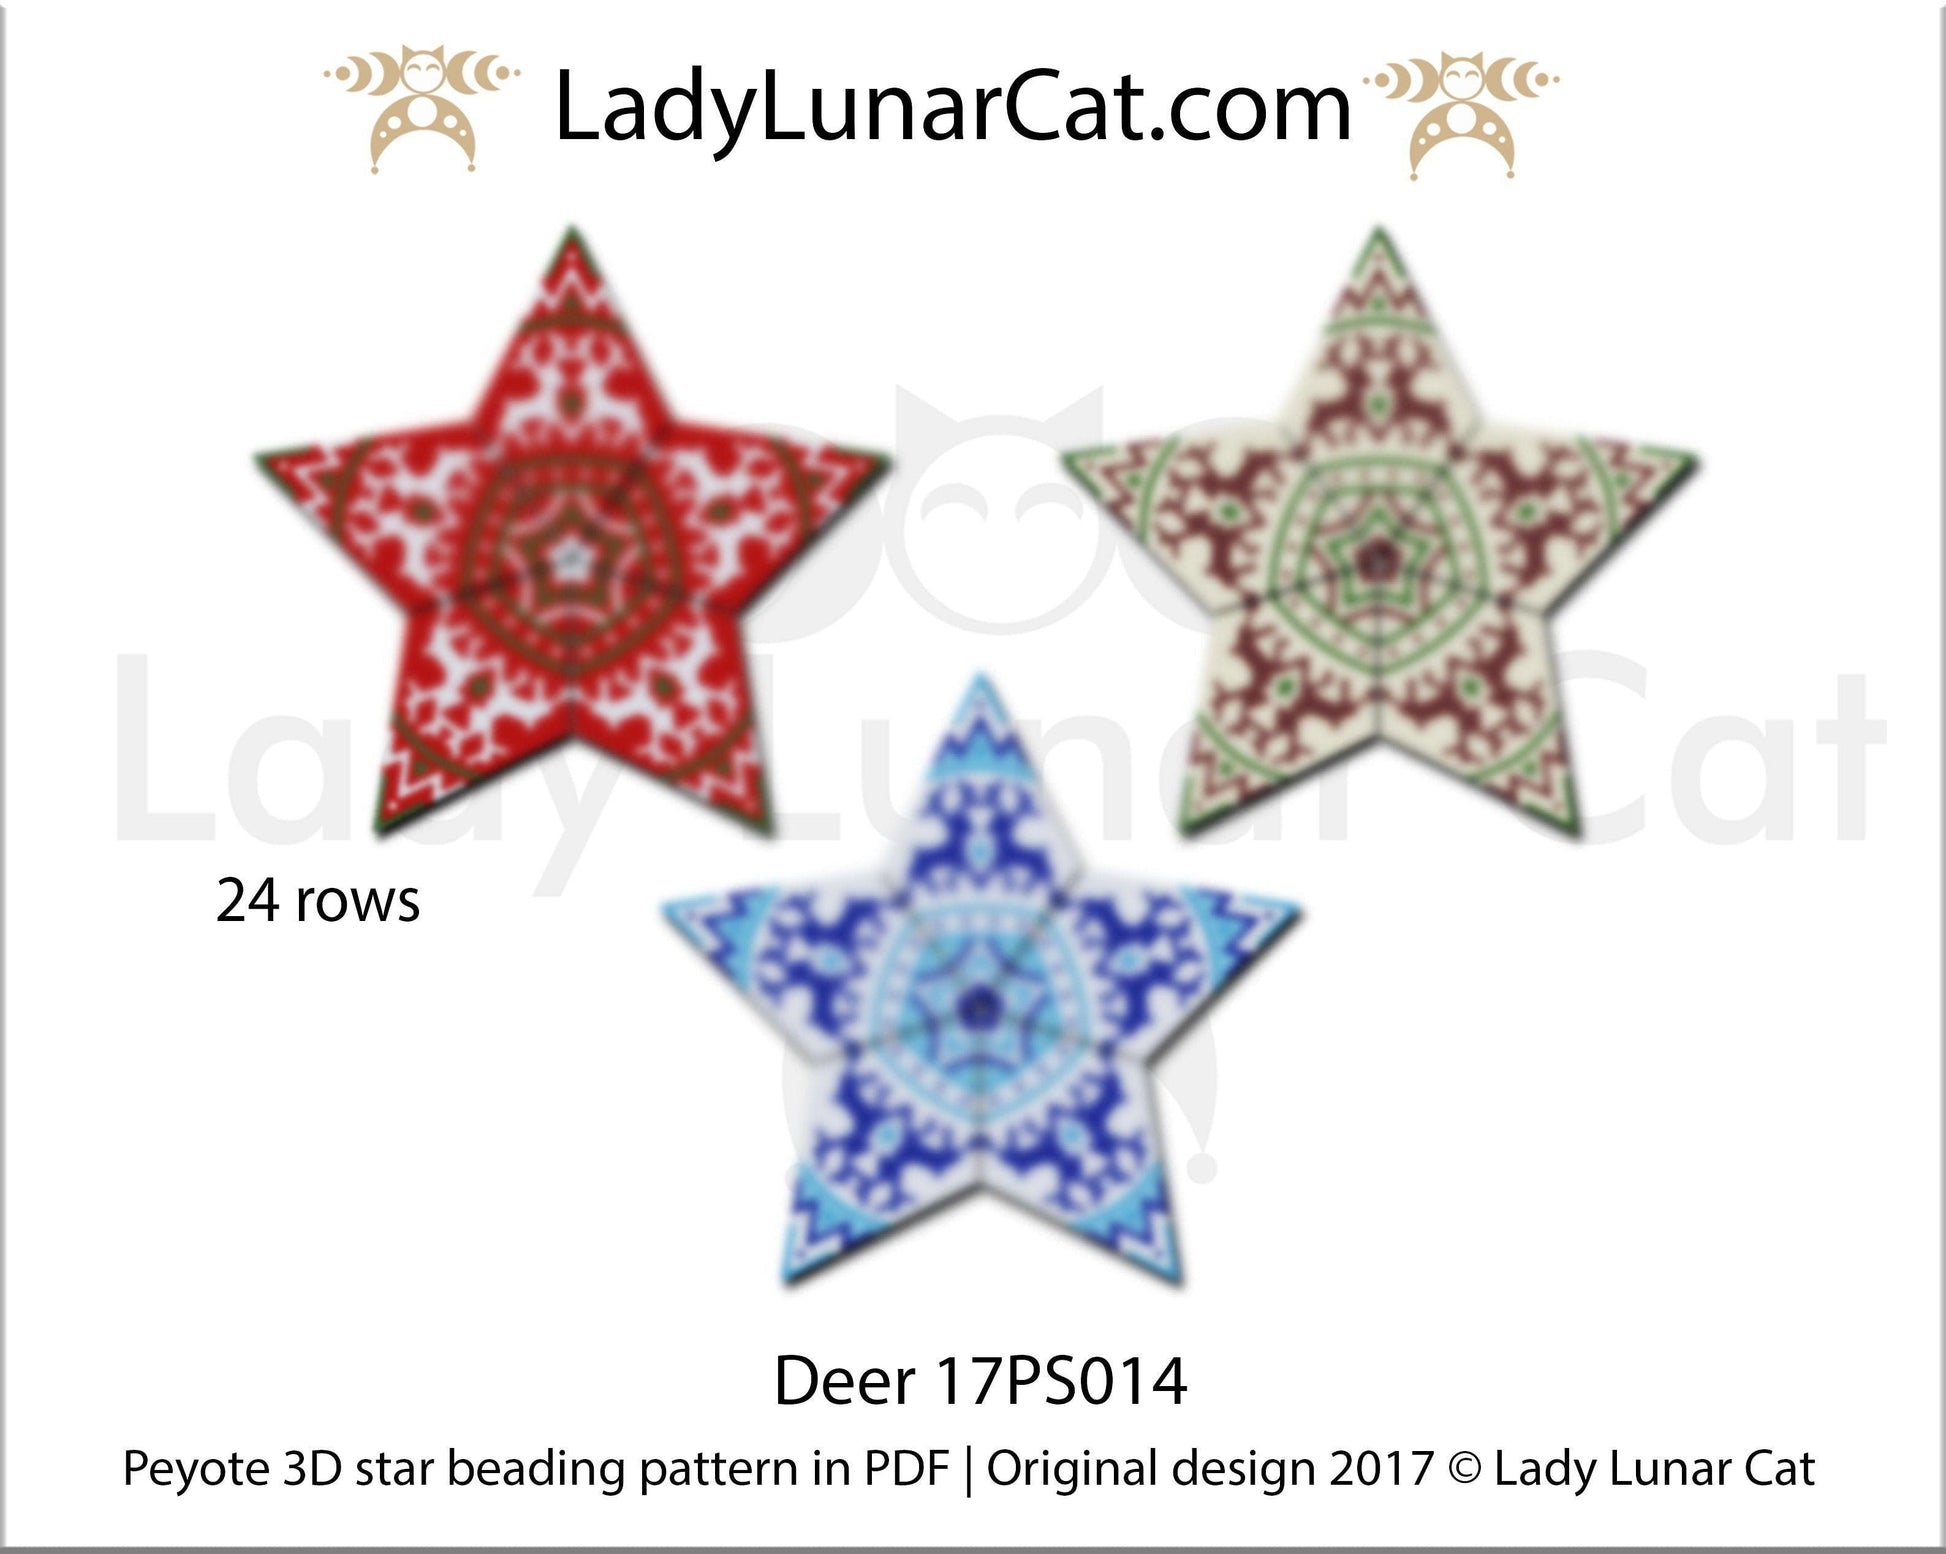 Peyote star patterns for beading Christmas ornaments with Northern deer 17PS014 LadyLunarCat